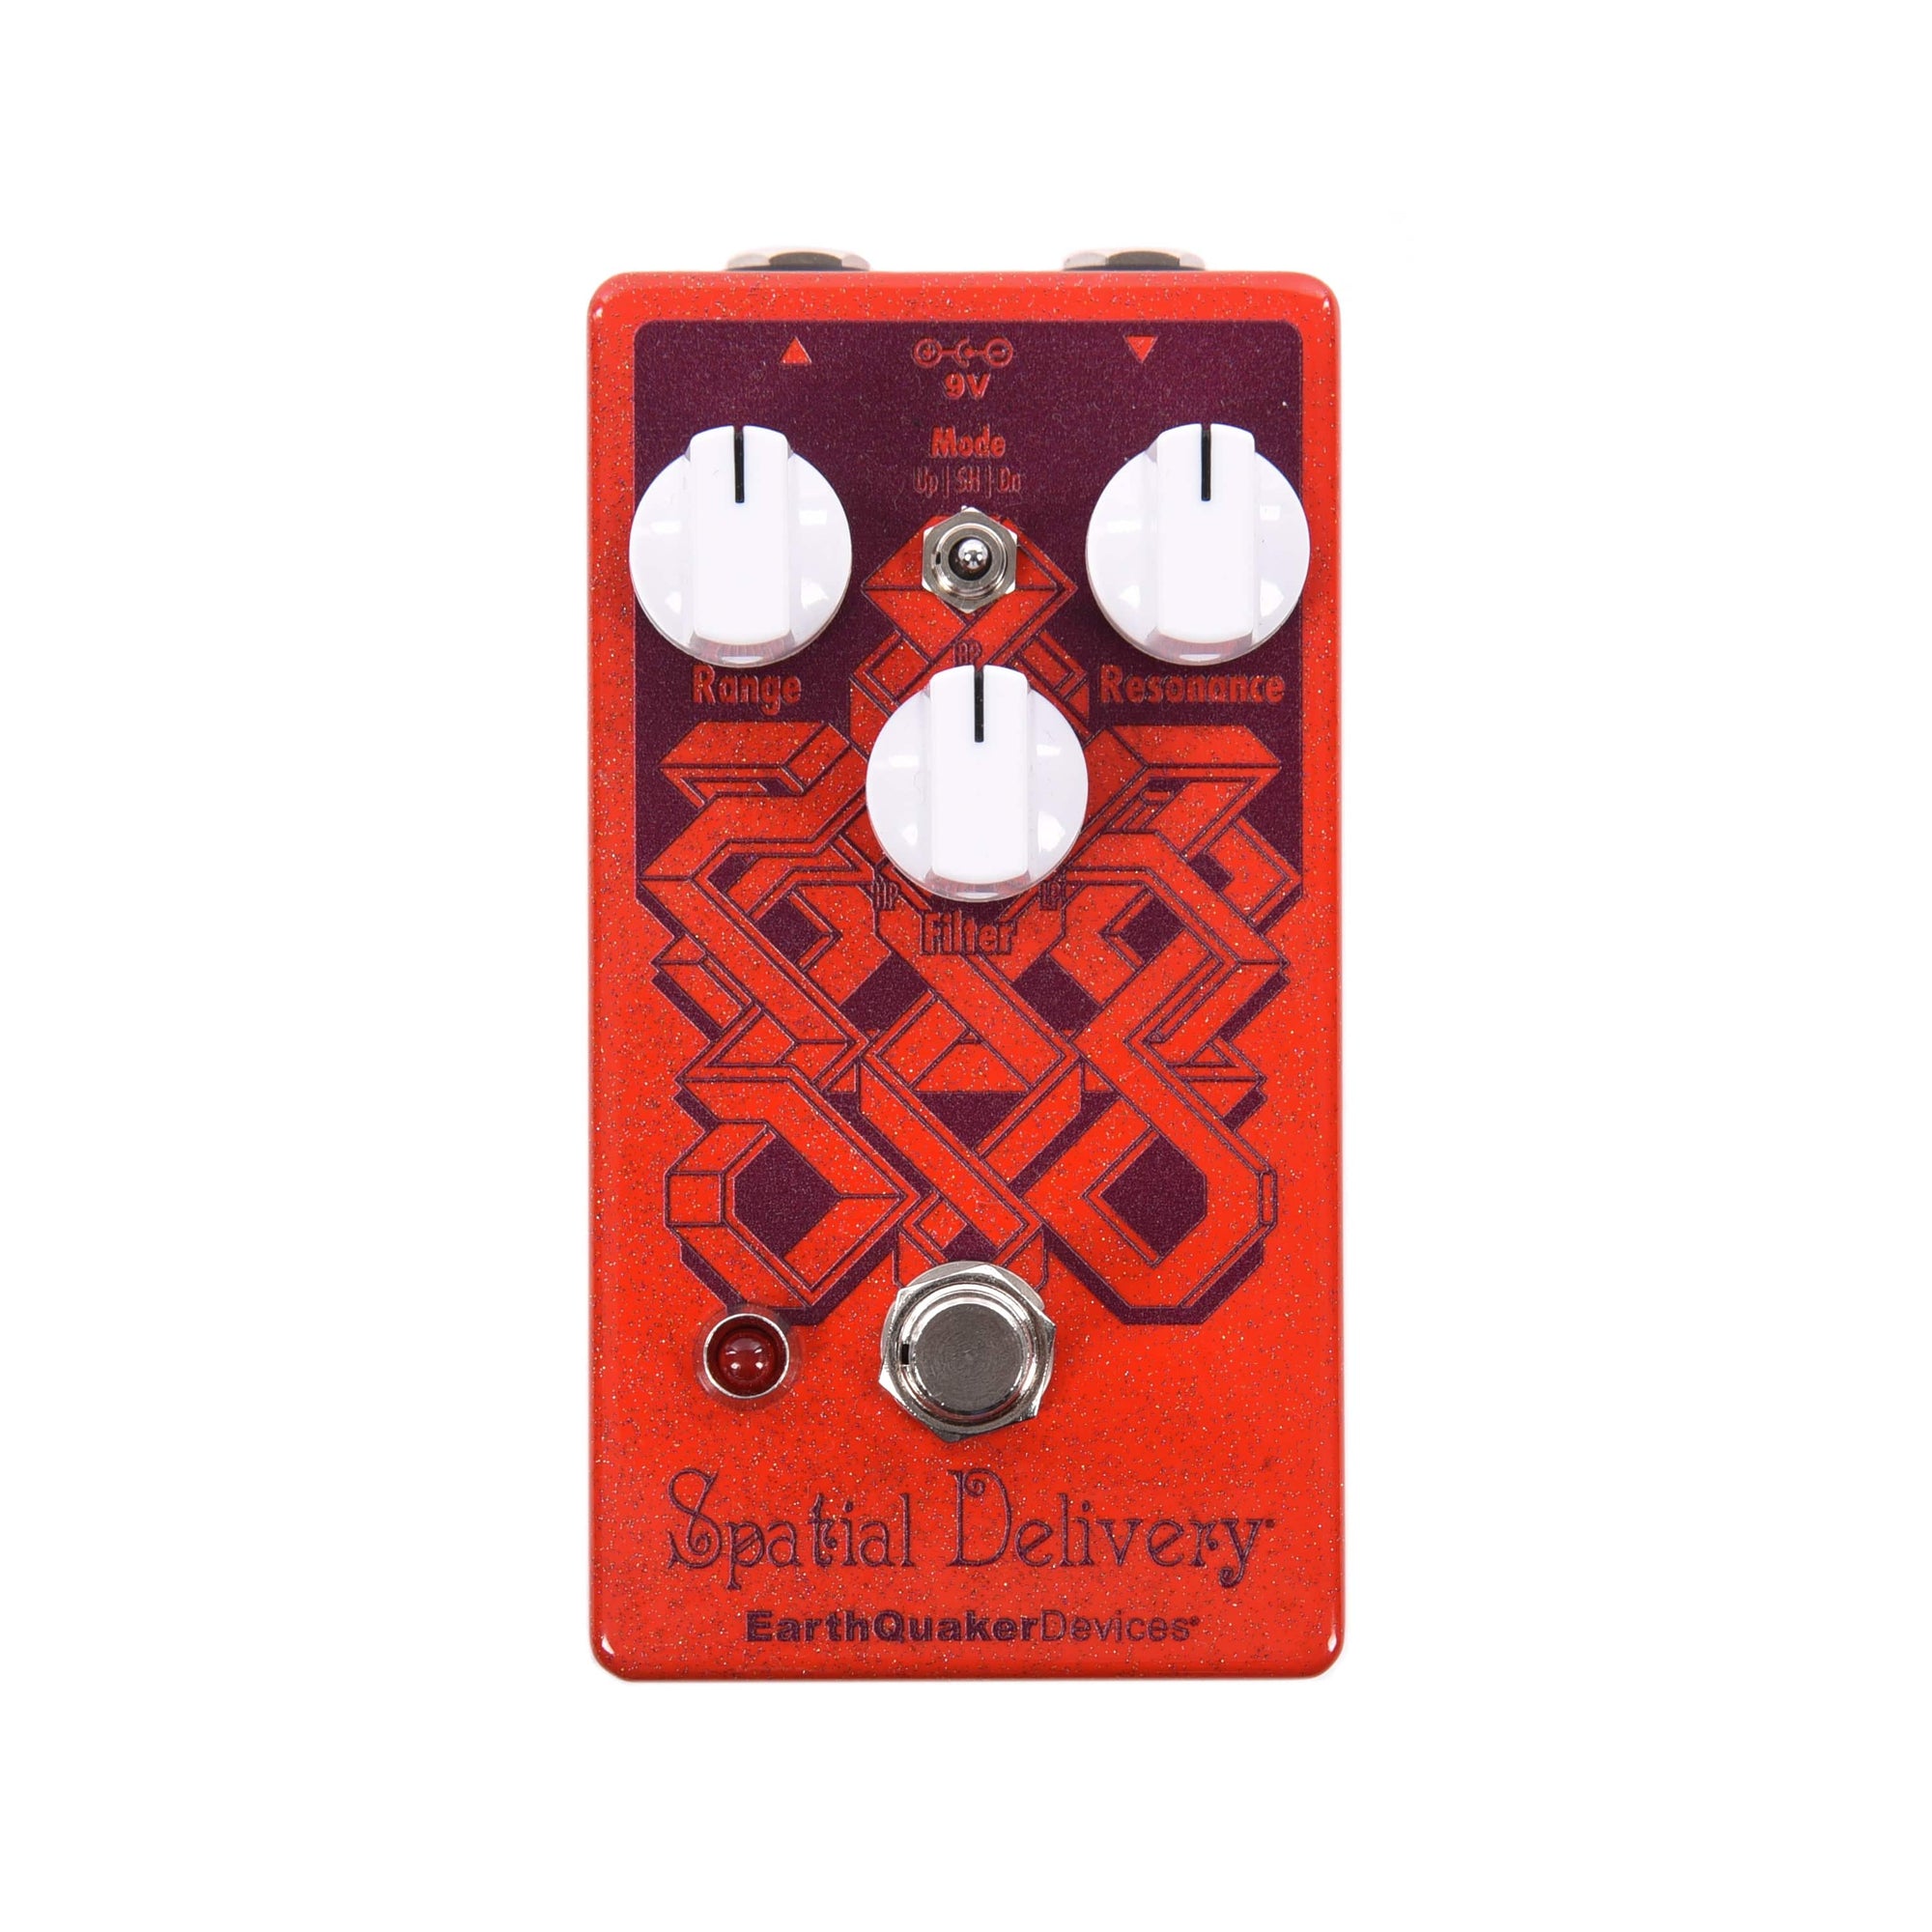 earthquaker devices spatial delivery abitur.gnesin-academy.ru